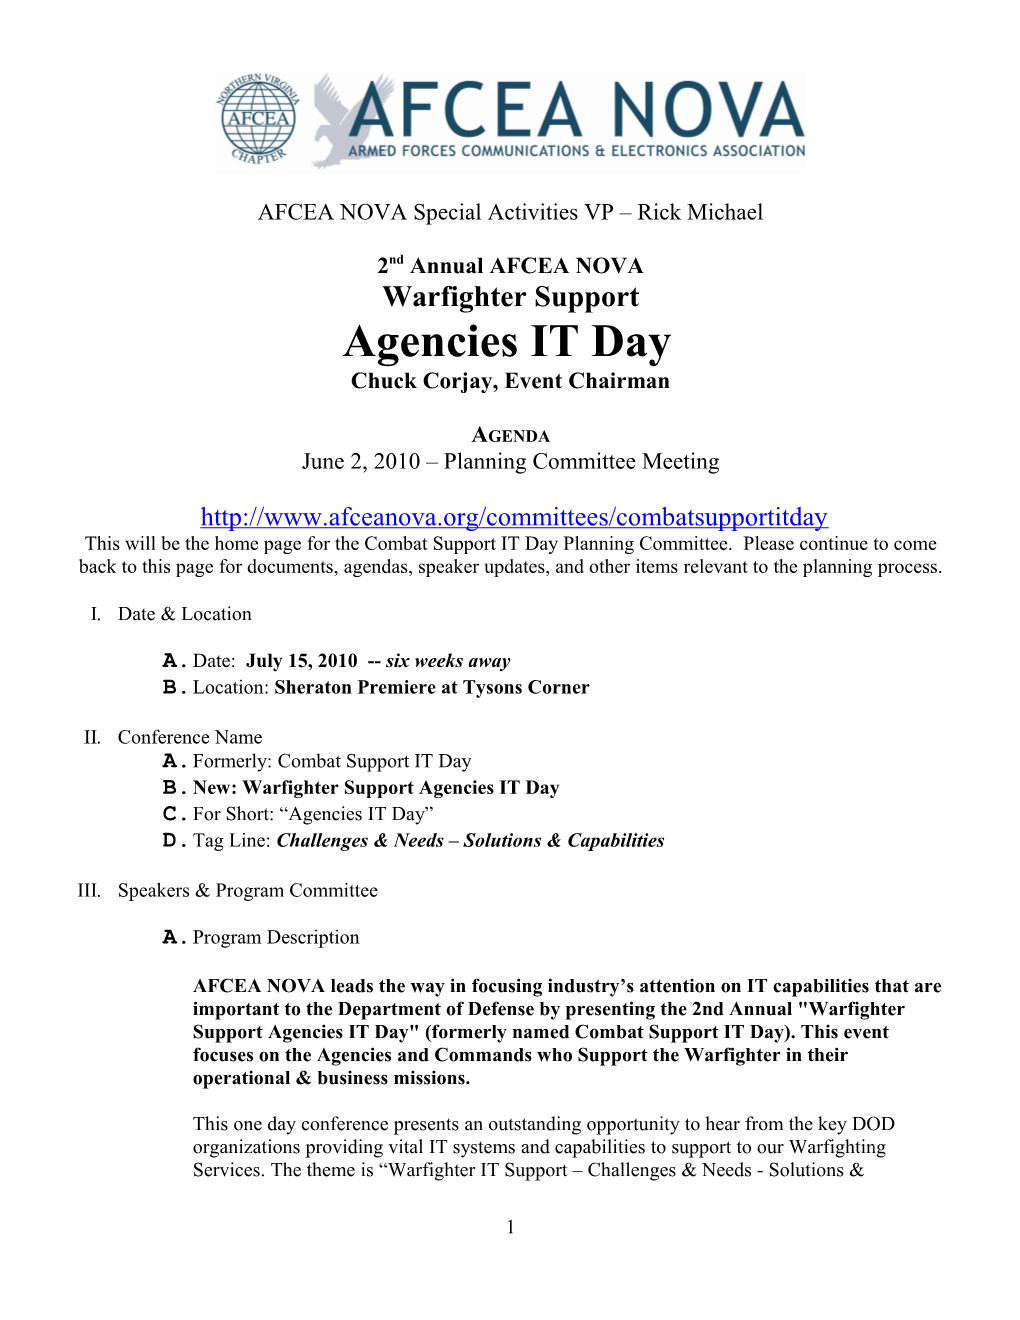 Critical Infrastructure Assurance Conference - January 25, 2002 s1